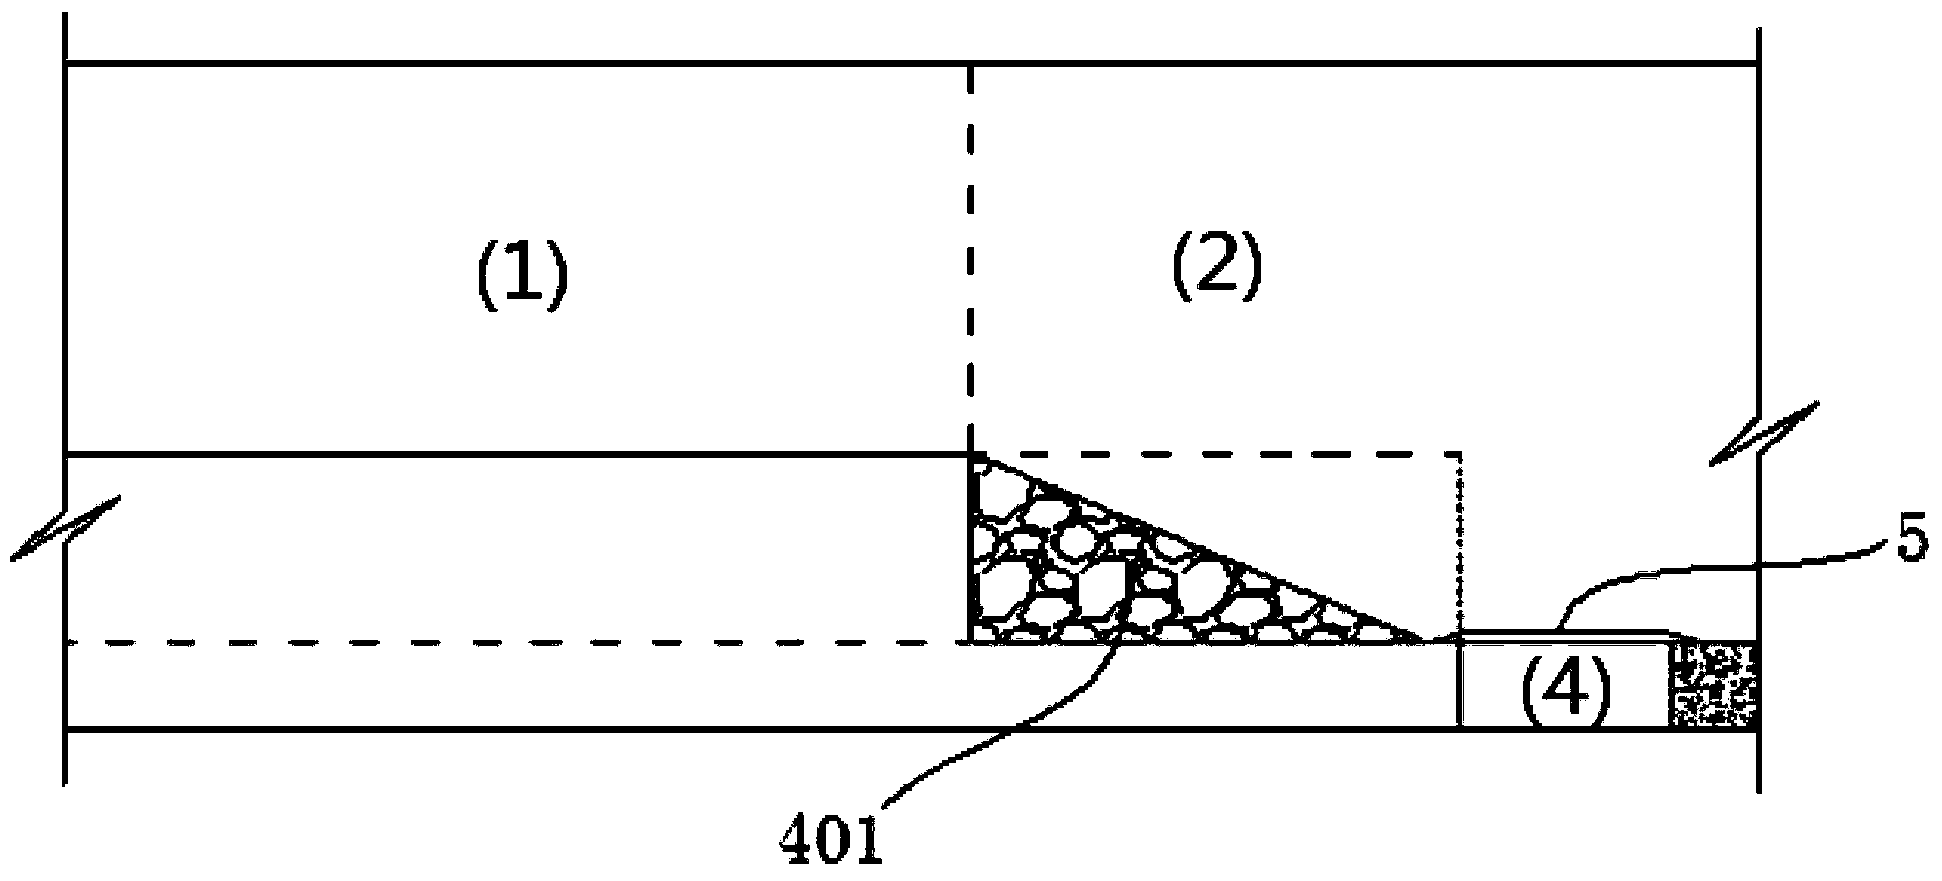 Construction method for excavating weak surrounding rock tunnel by hydraulic breaking hammer